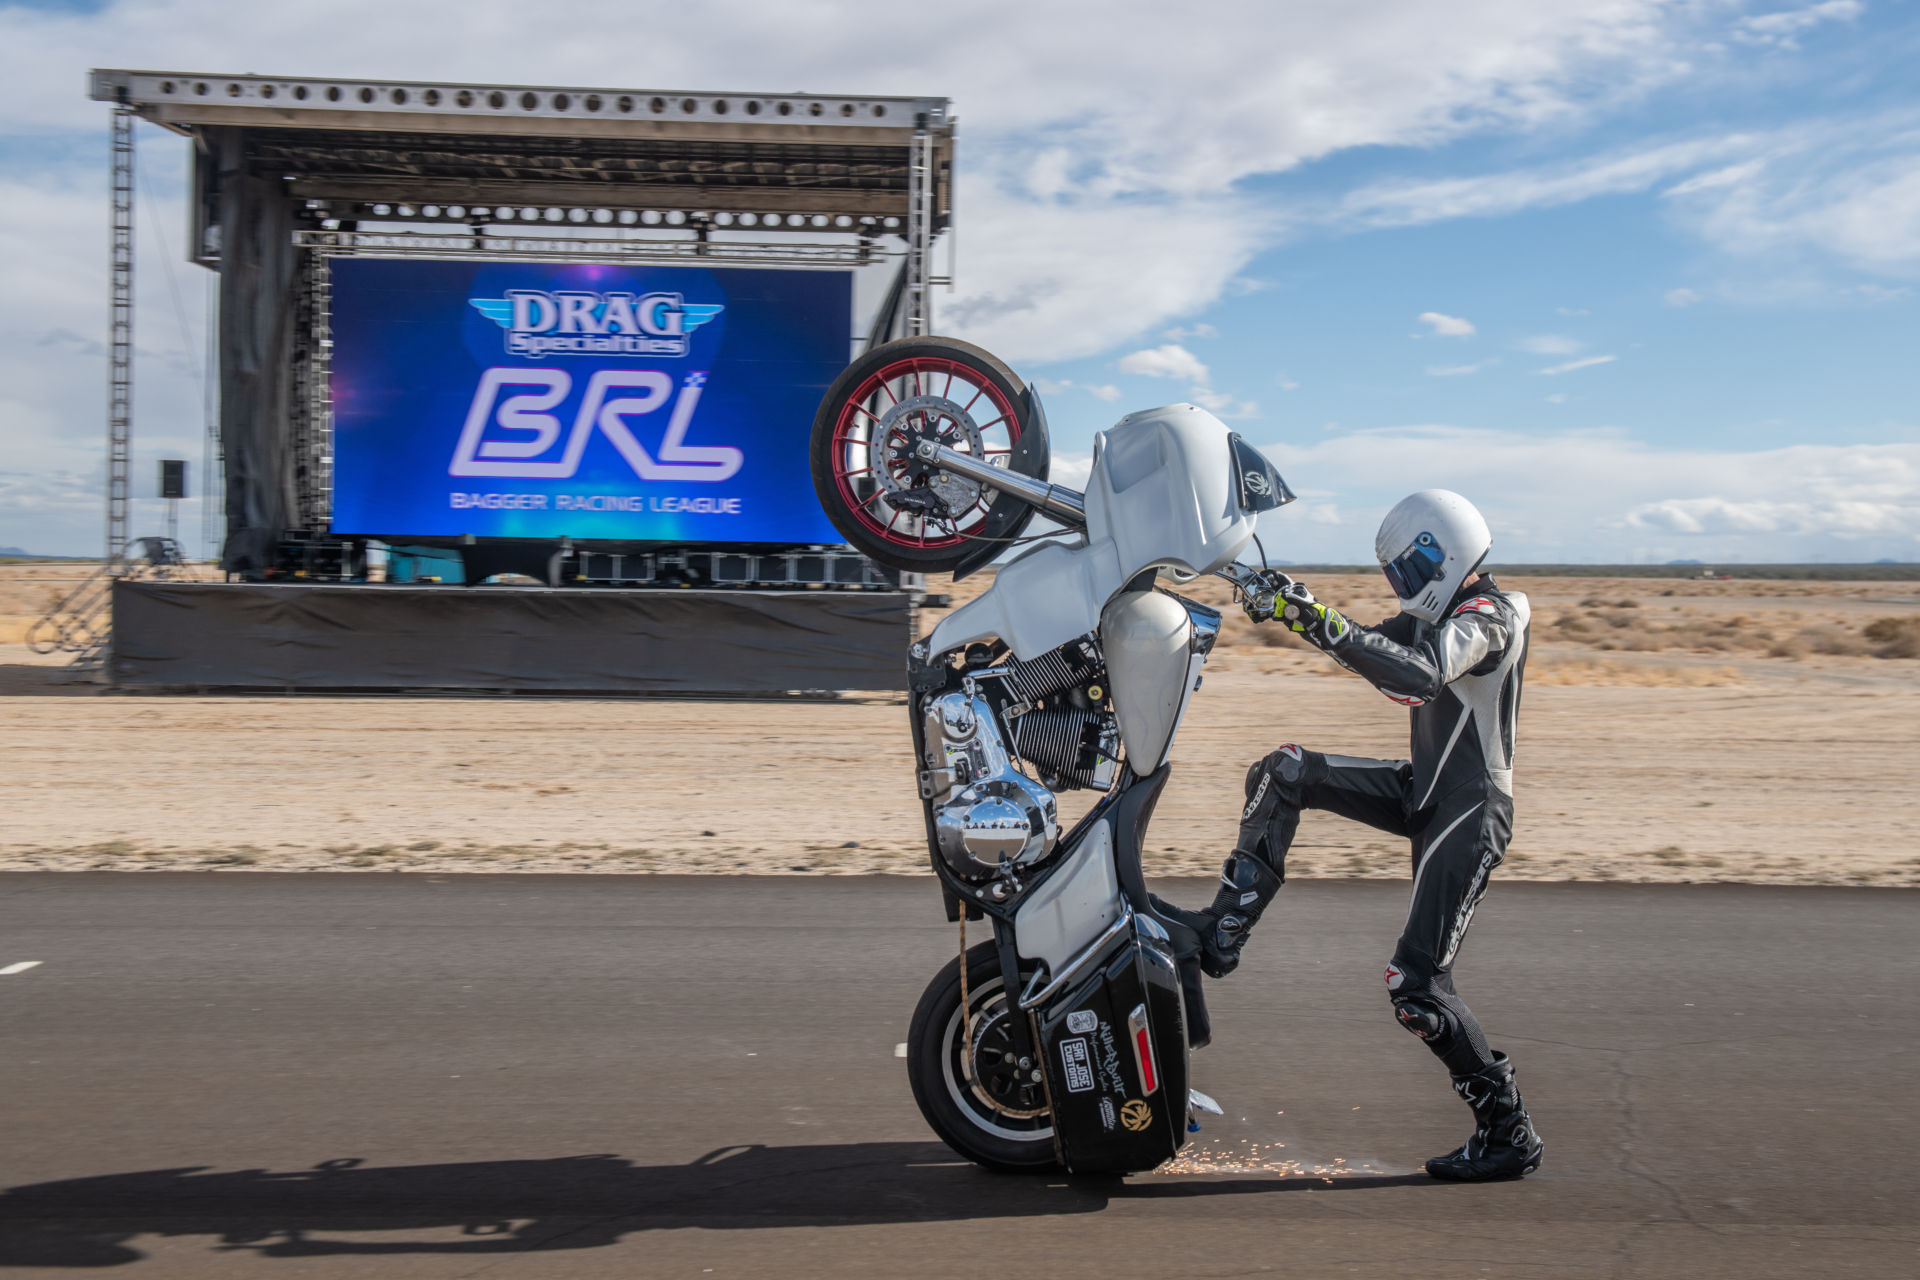 The Bagger Racing League will include a Stunt GP racing class and stunt shows. Photo by Justin George, courtesy BRL.